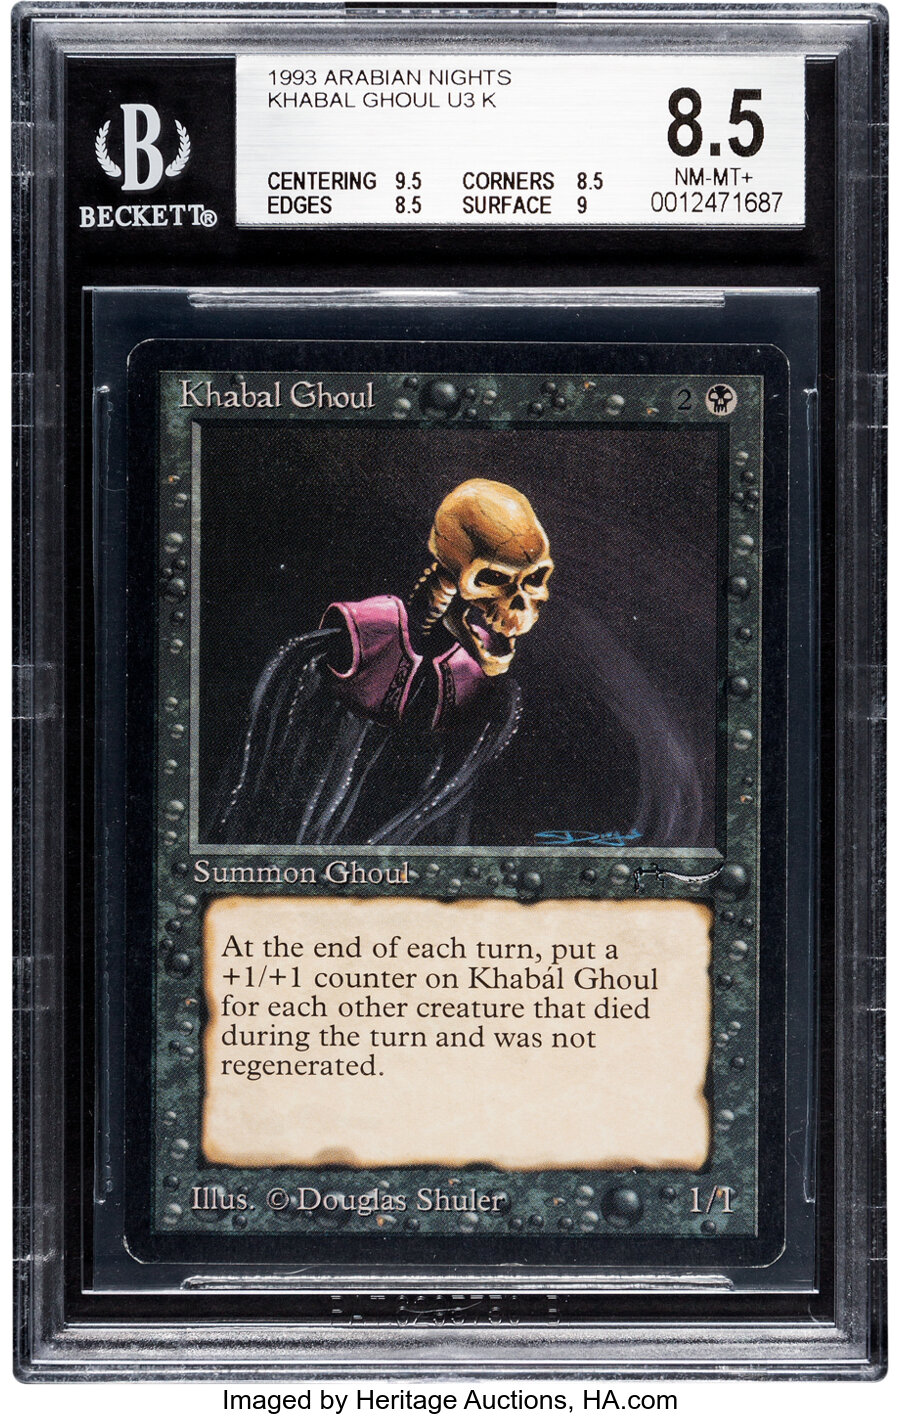 Magic: The Gathering Khabal Ghoul Arabian Nights Edition (Wizards of the Coast, 1993) BGS NM-MT+ 8.5